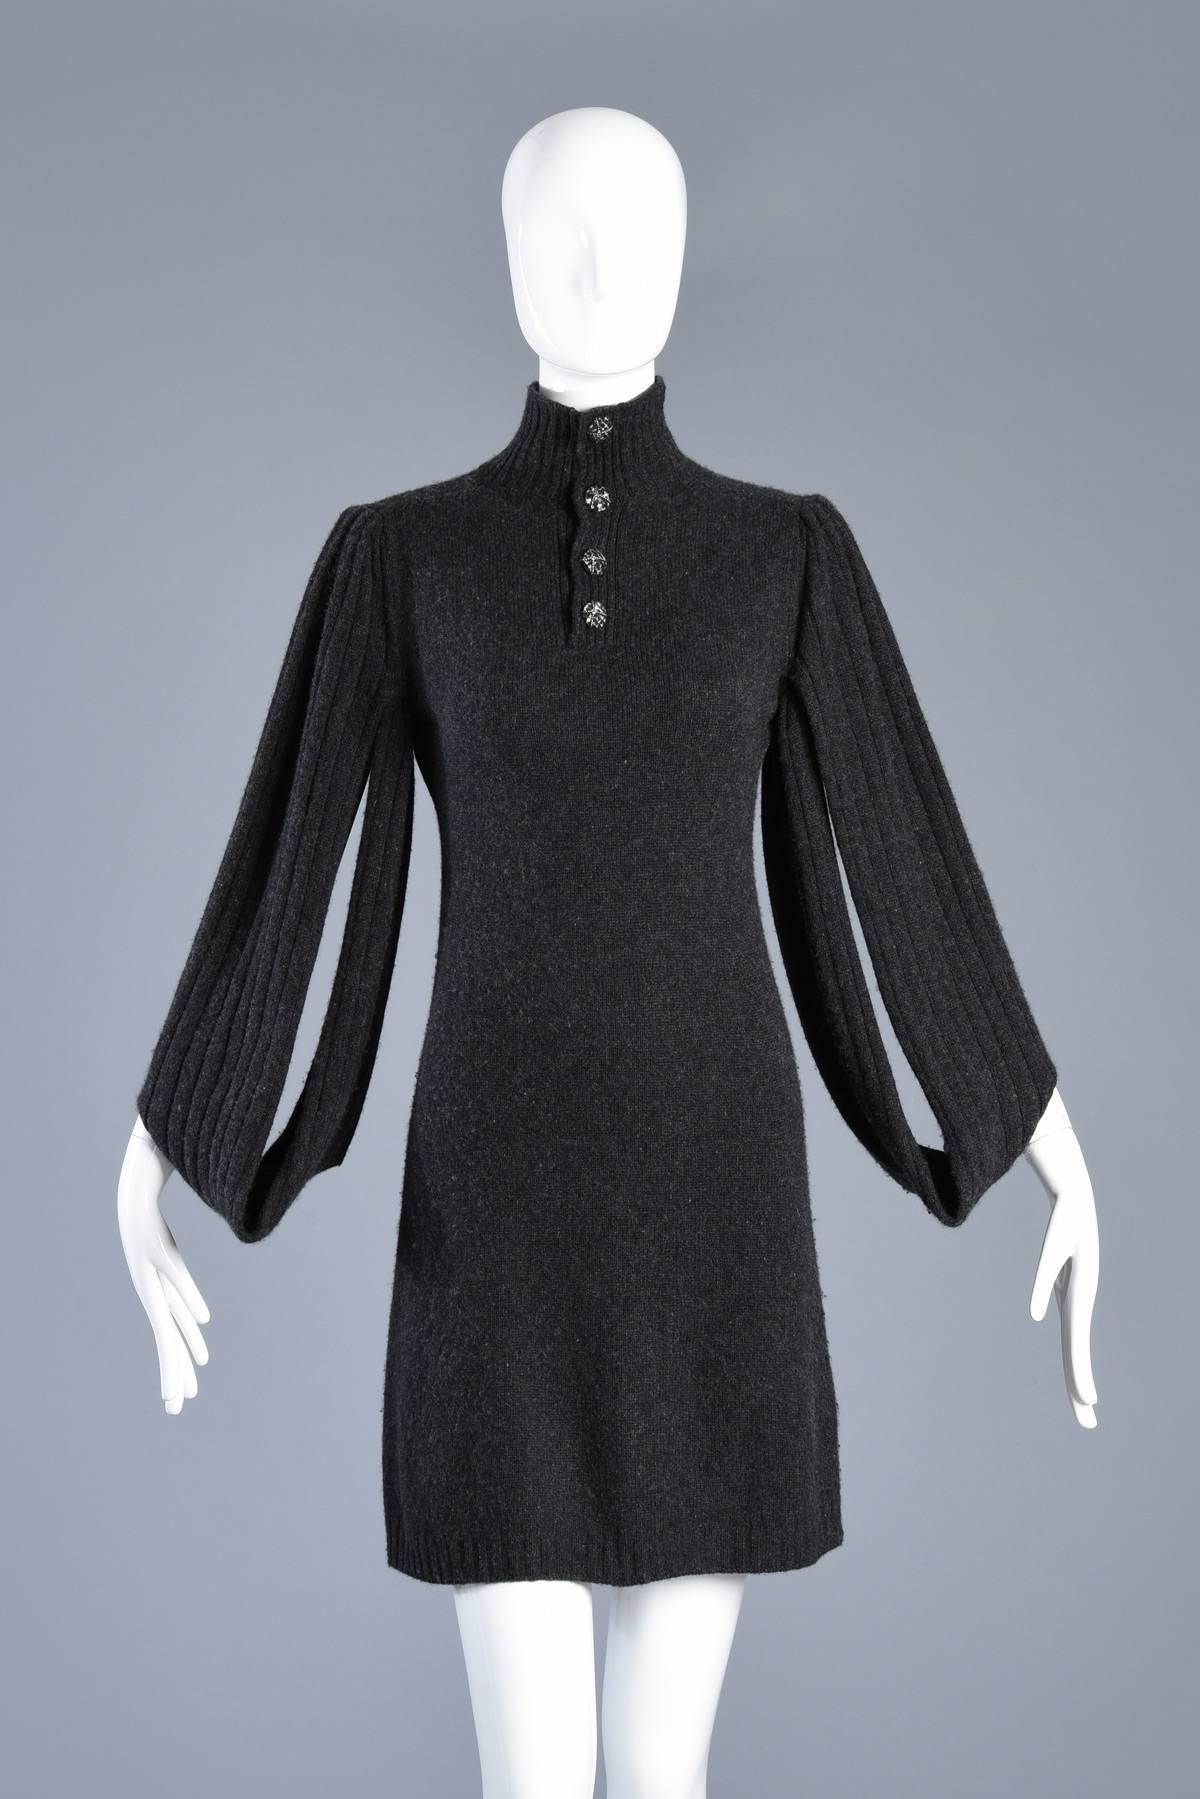 Black Killer Chanel Cashmere Sweater Dress with Open Sleeves